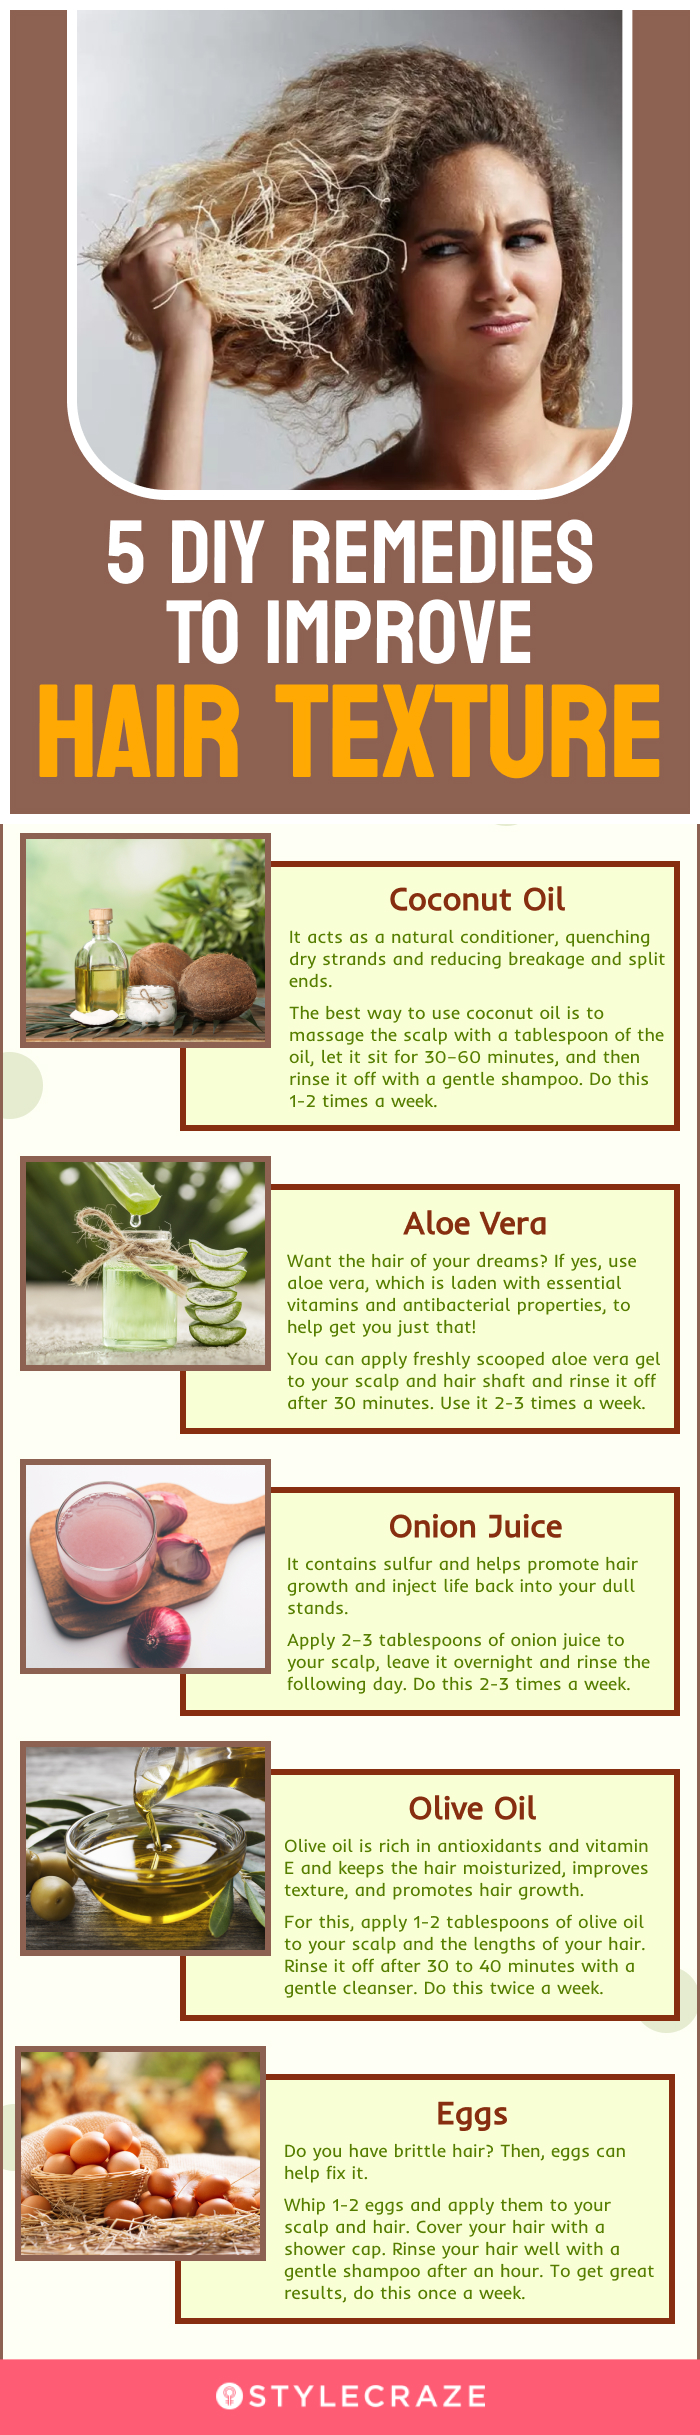 5 diy remedies to improve hair texture(infographic)